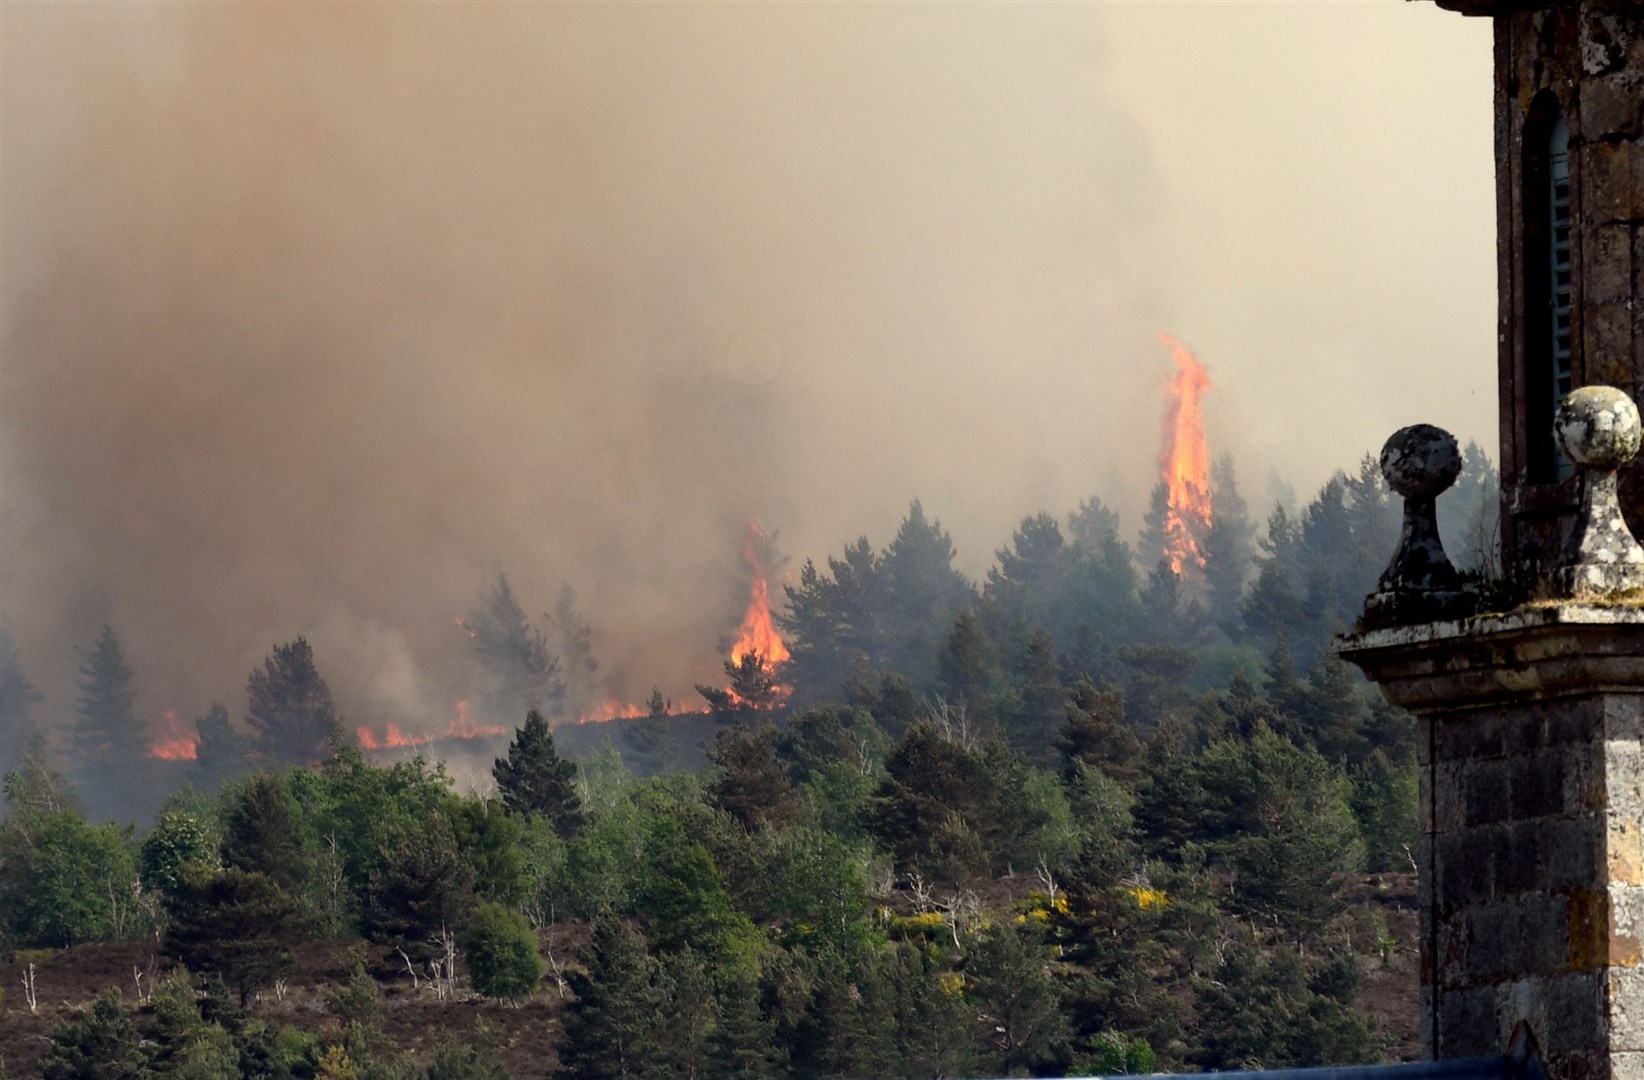 Flames above the trees at the recent Daviot wildfire.